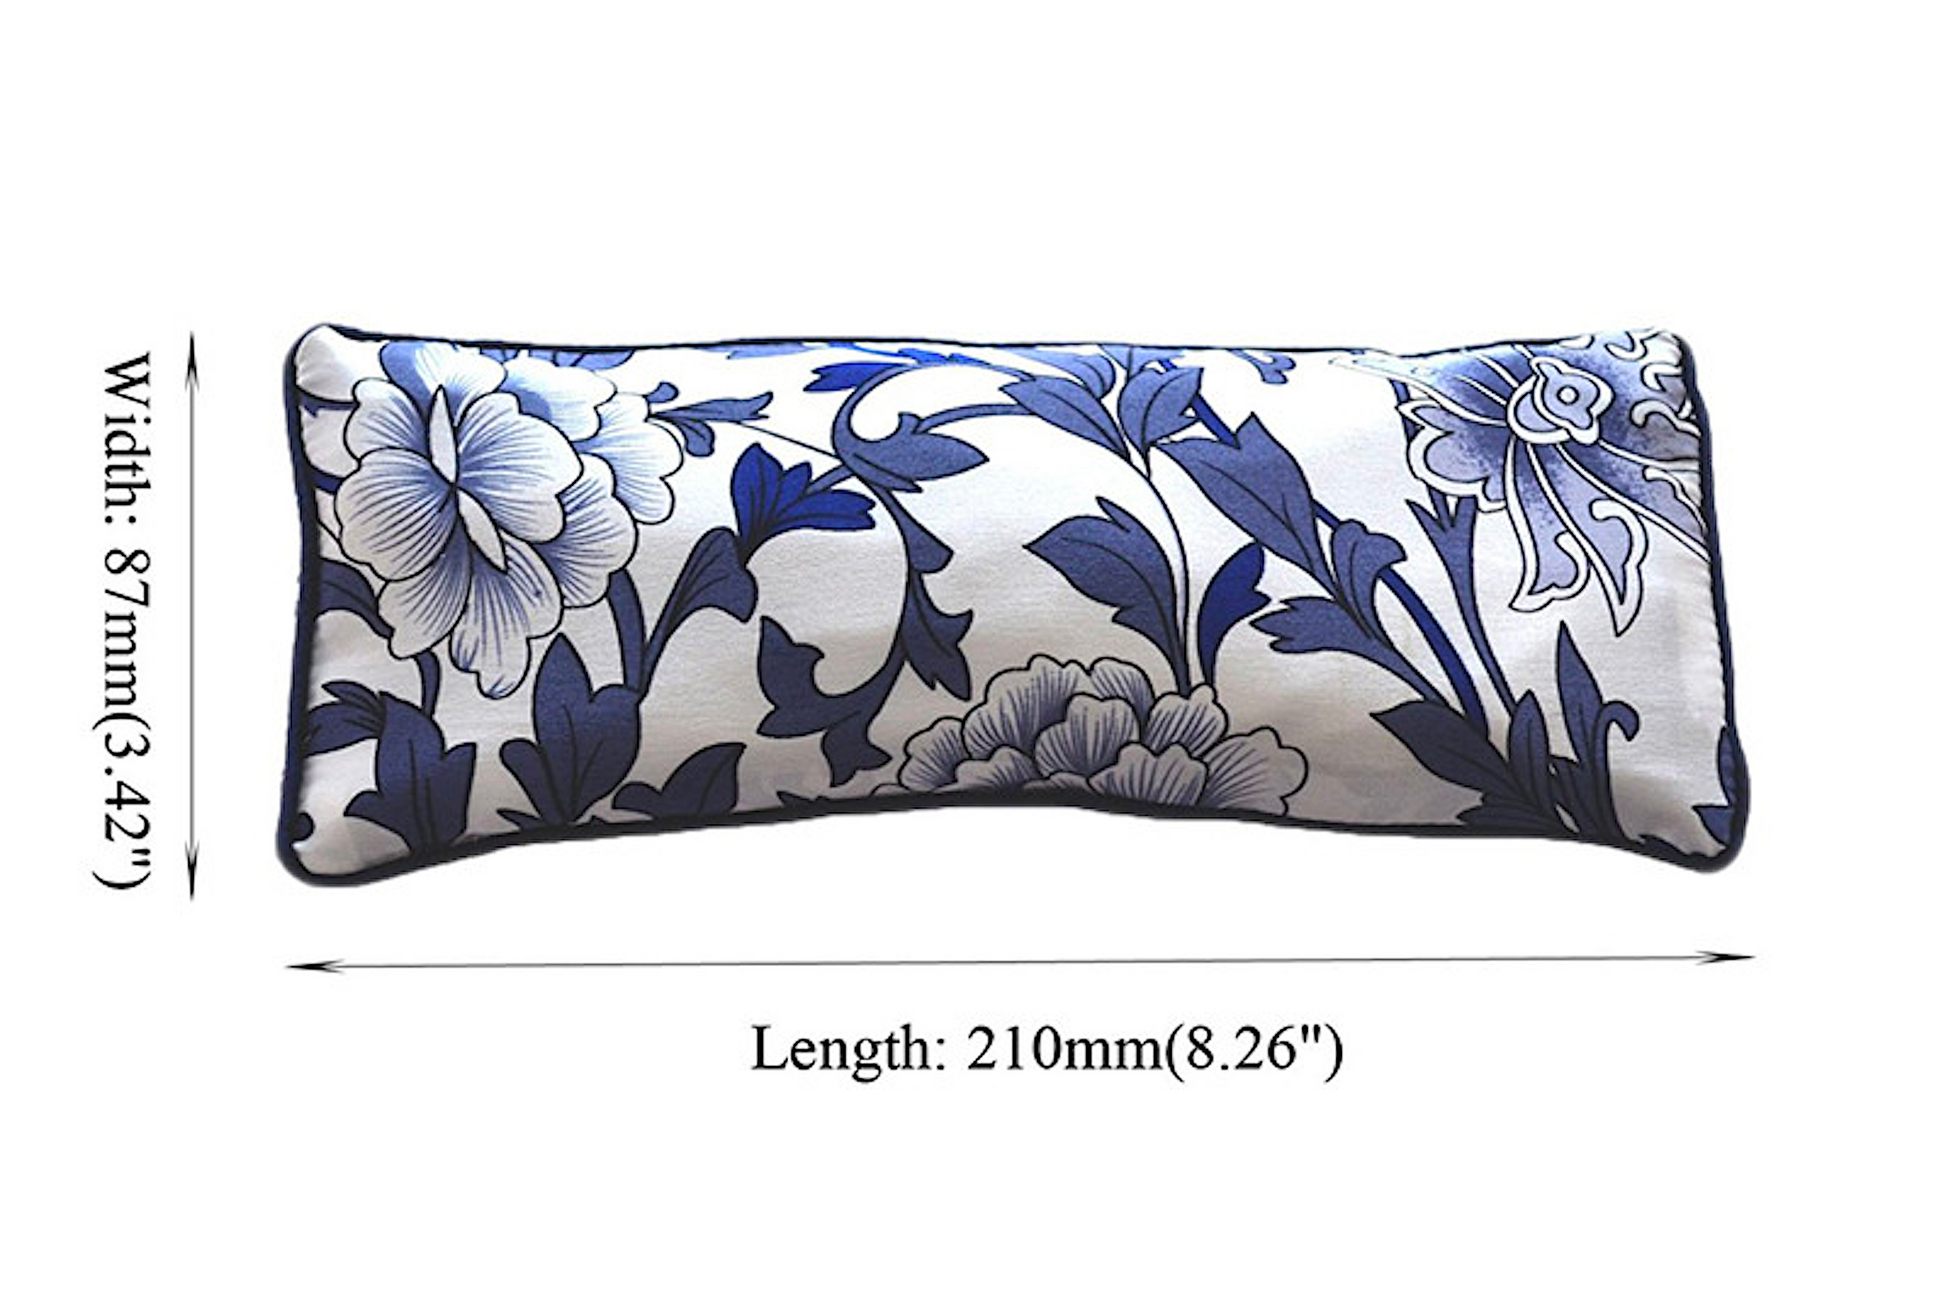 Eye Pillow With Lavender Flax Seed Filling For Soothing Eye 100% Silk Home 19.99 Indigo Paisley